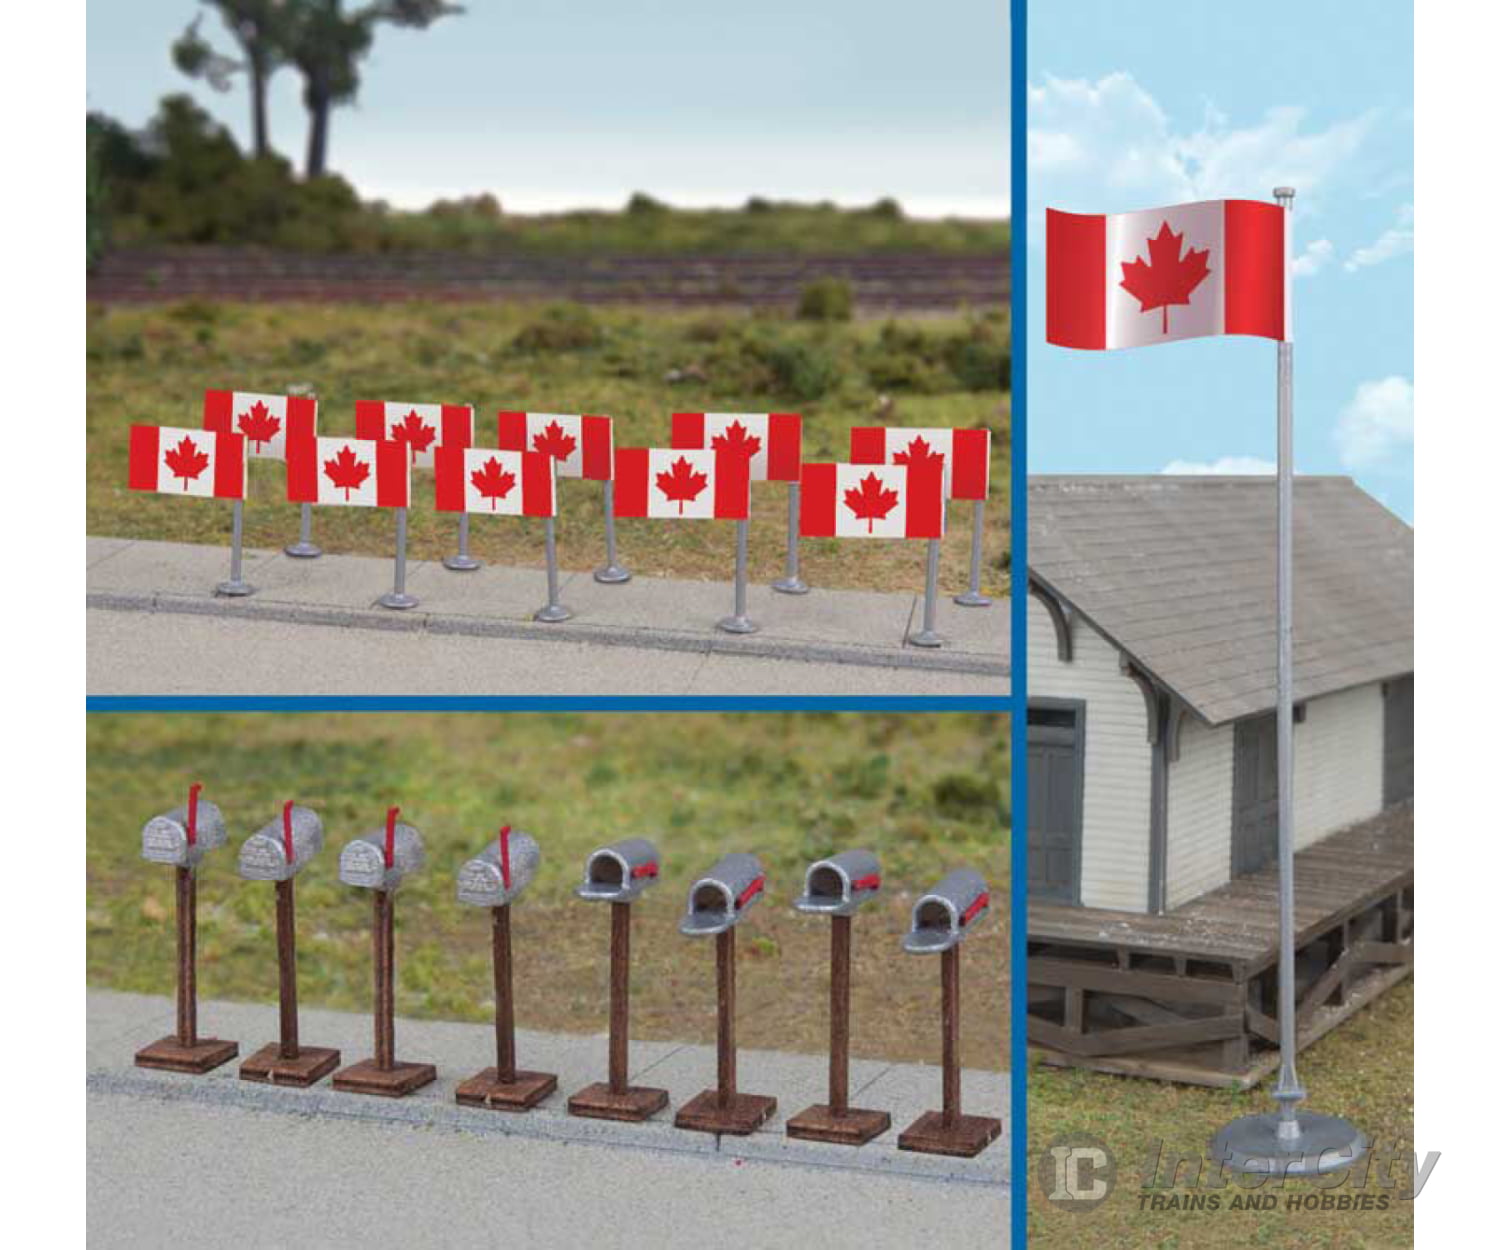 Walthers Scenemaster Ho 4172 Flags (11) And Mailboxes (8) - - Canadian 1965 - Present Scenery